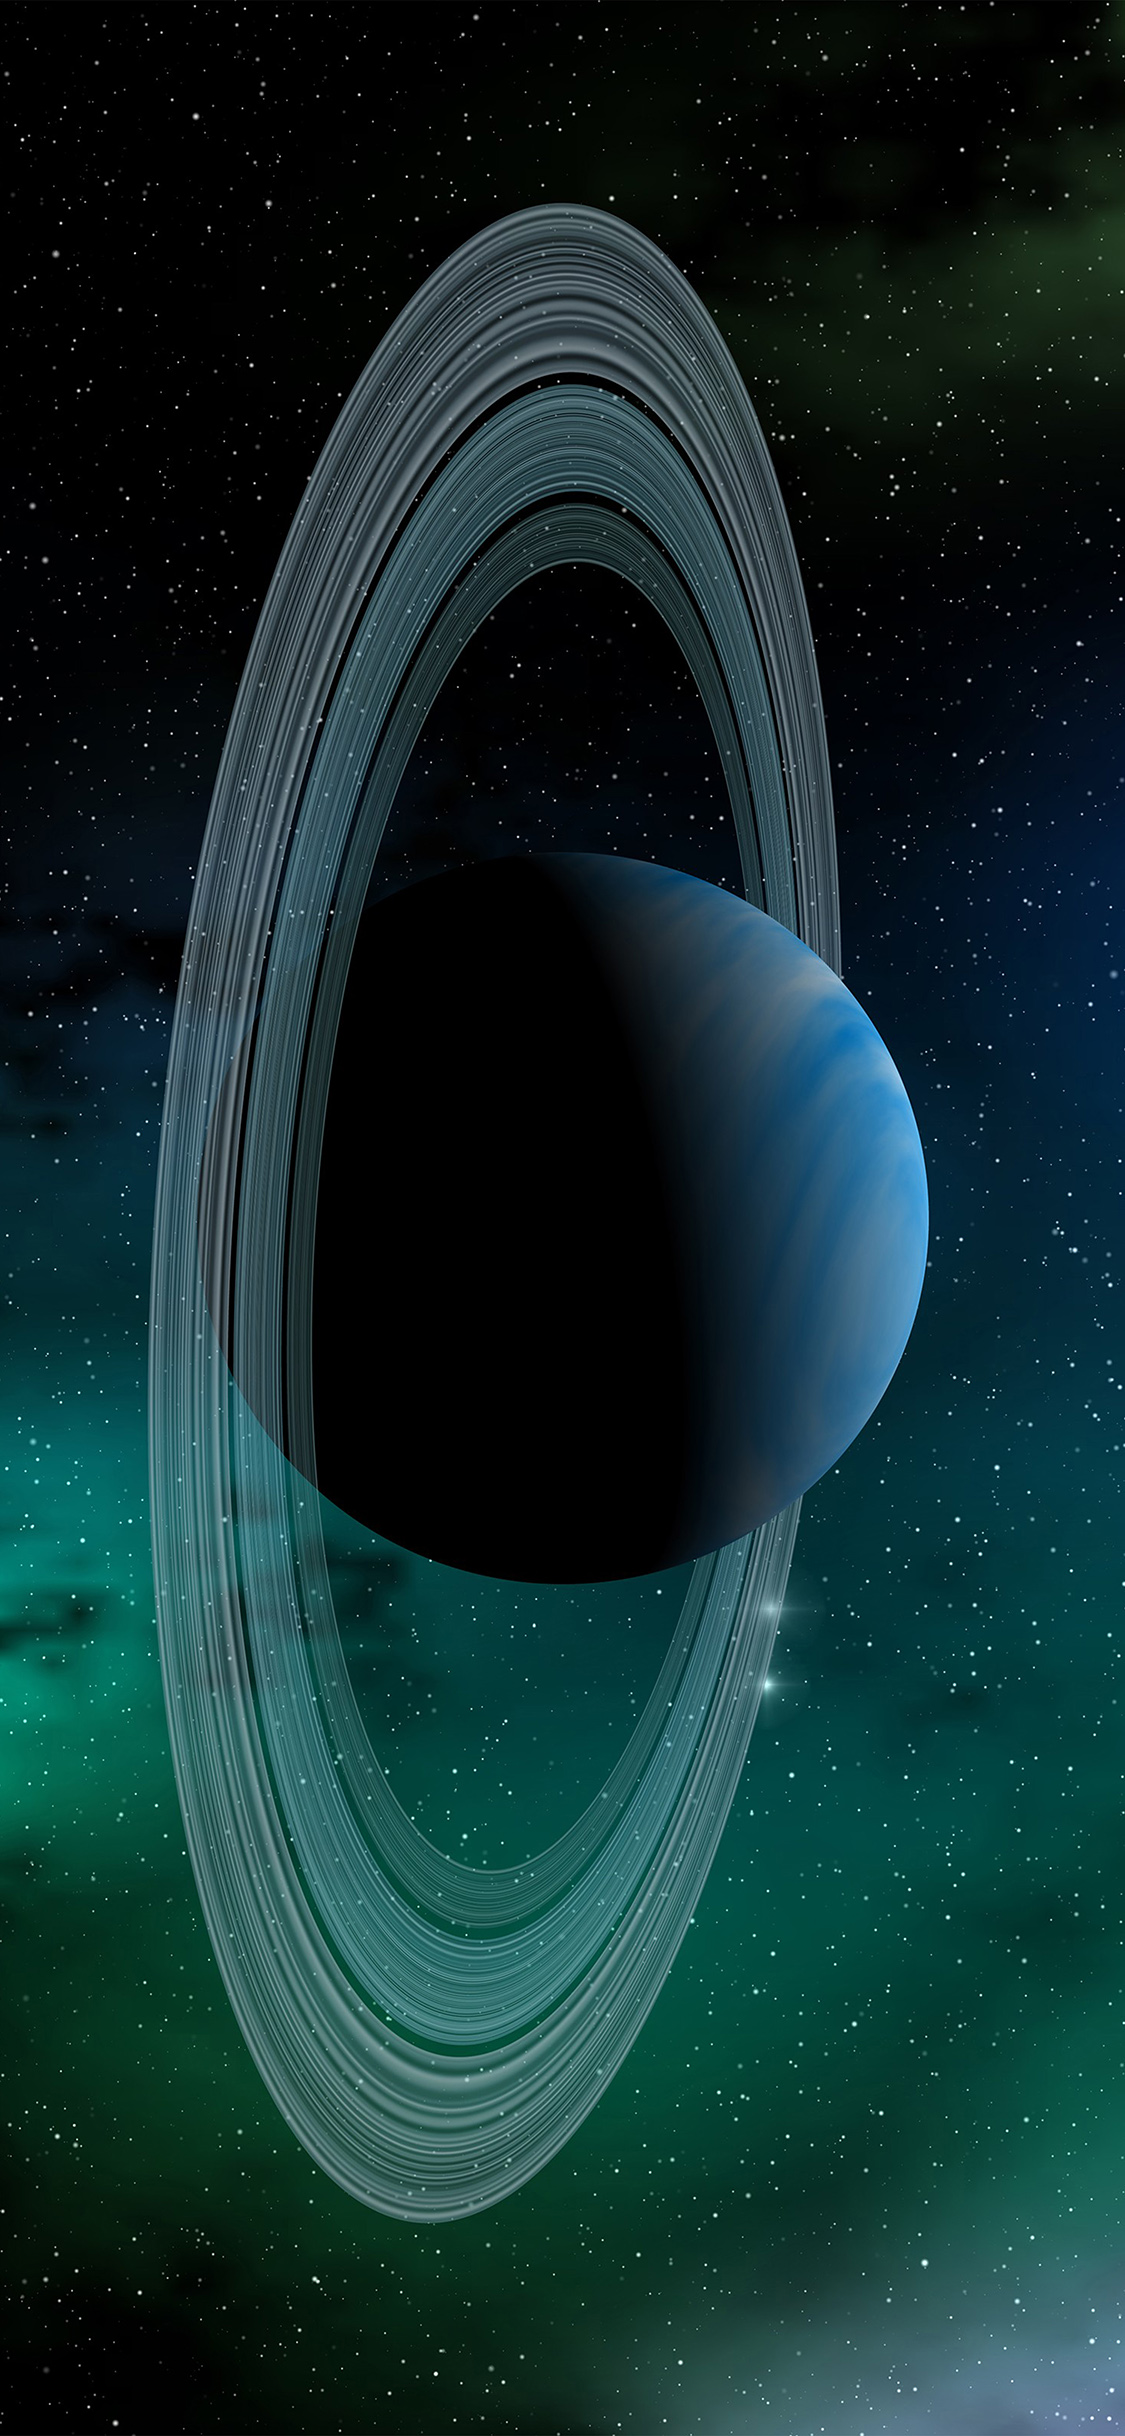 Com Apple Iphone Wallpaper At78 Space Planet Saturn - Saturn Wallpaper Iphone X - HD Wallpaper 